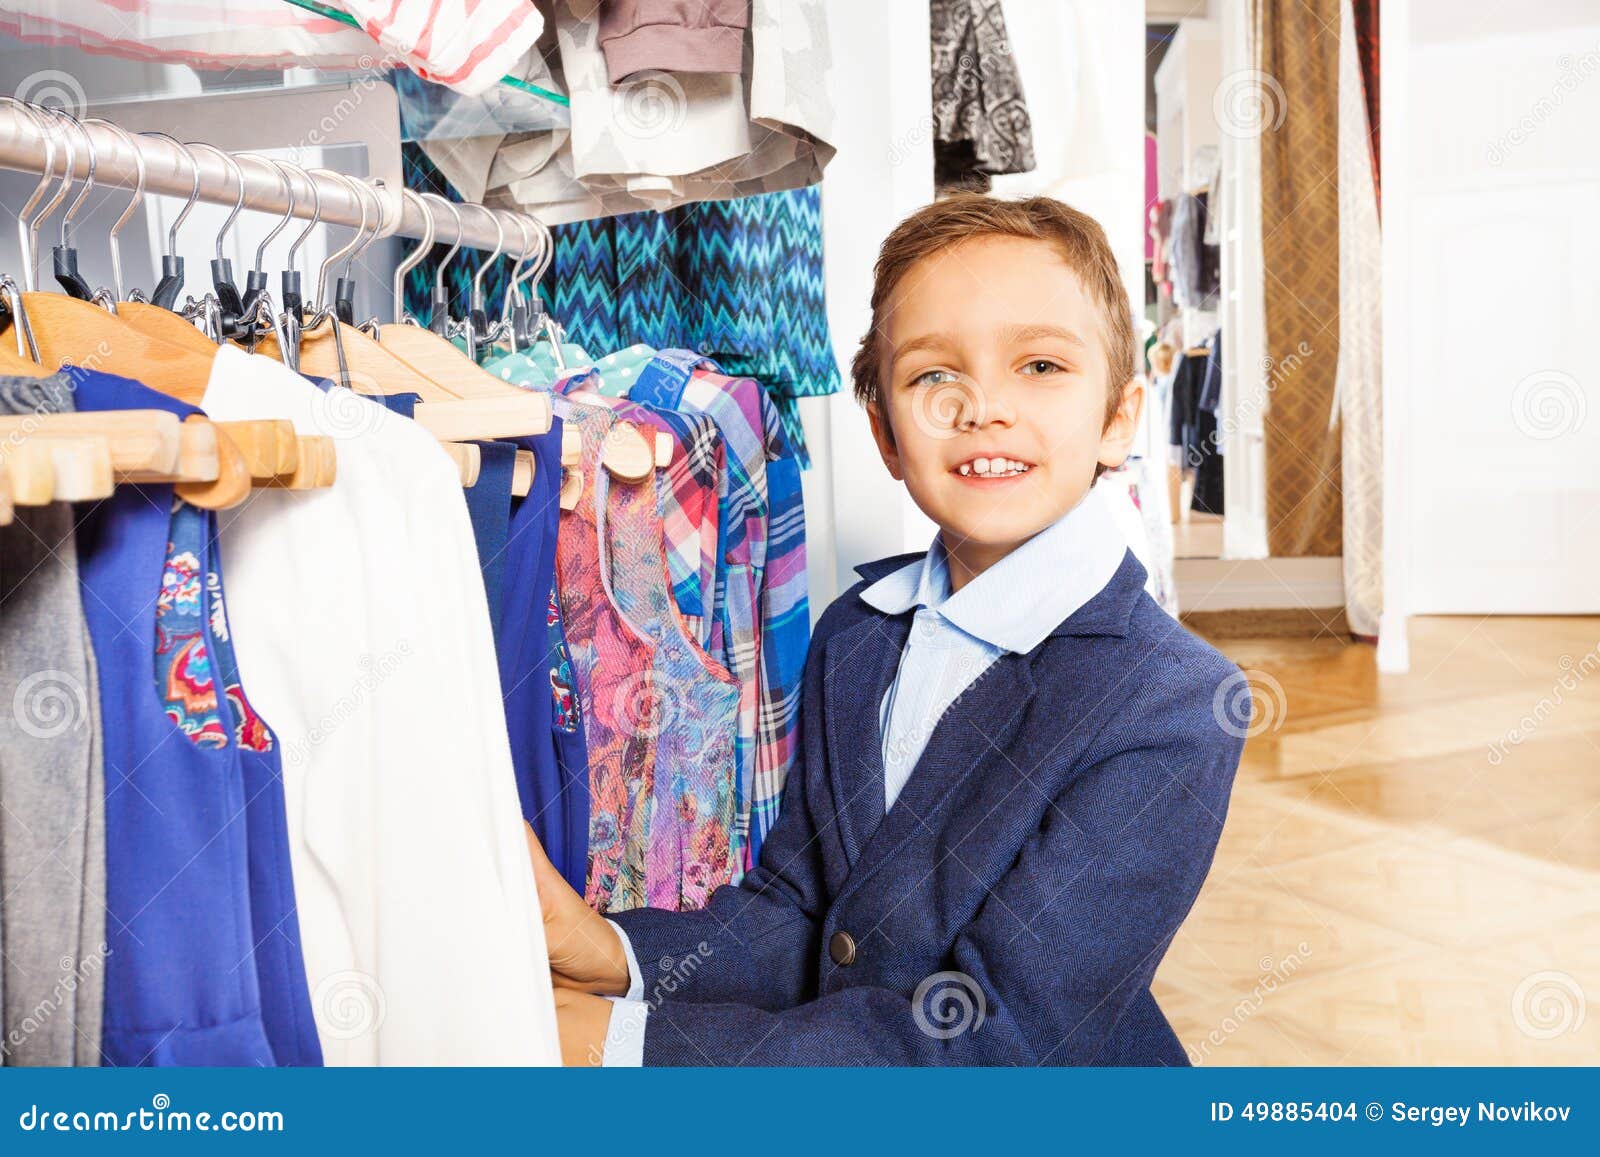 Small Boy in Navy Suit Standing Near Clothes Stock Photo - Image of ...